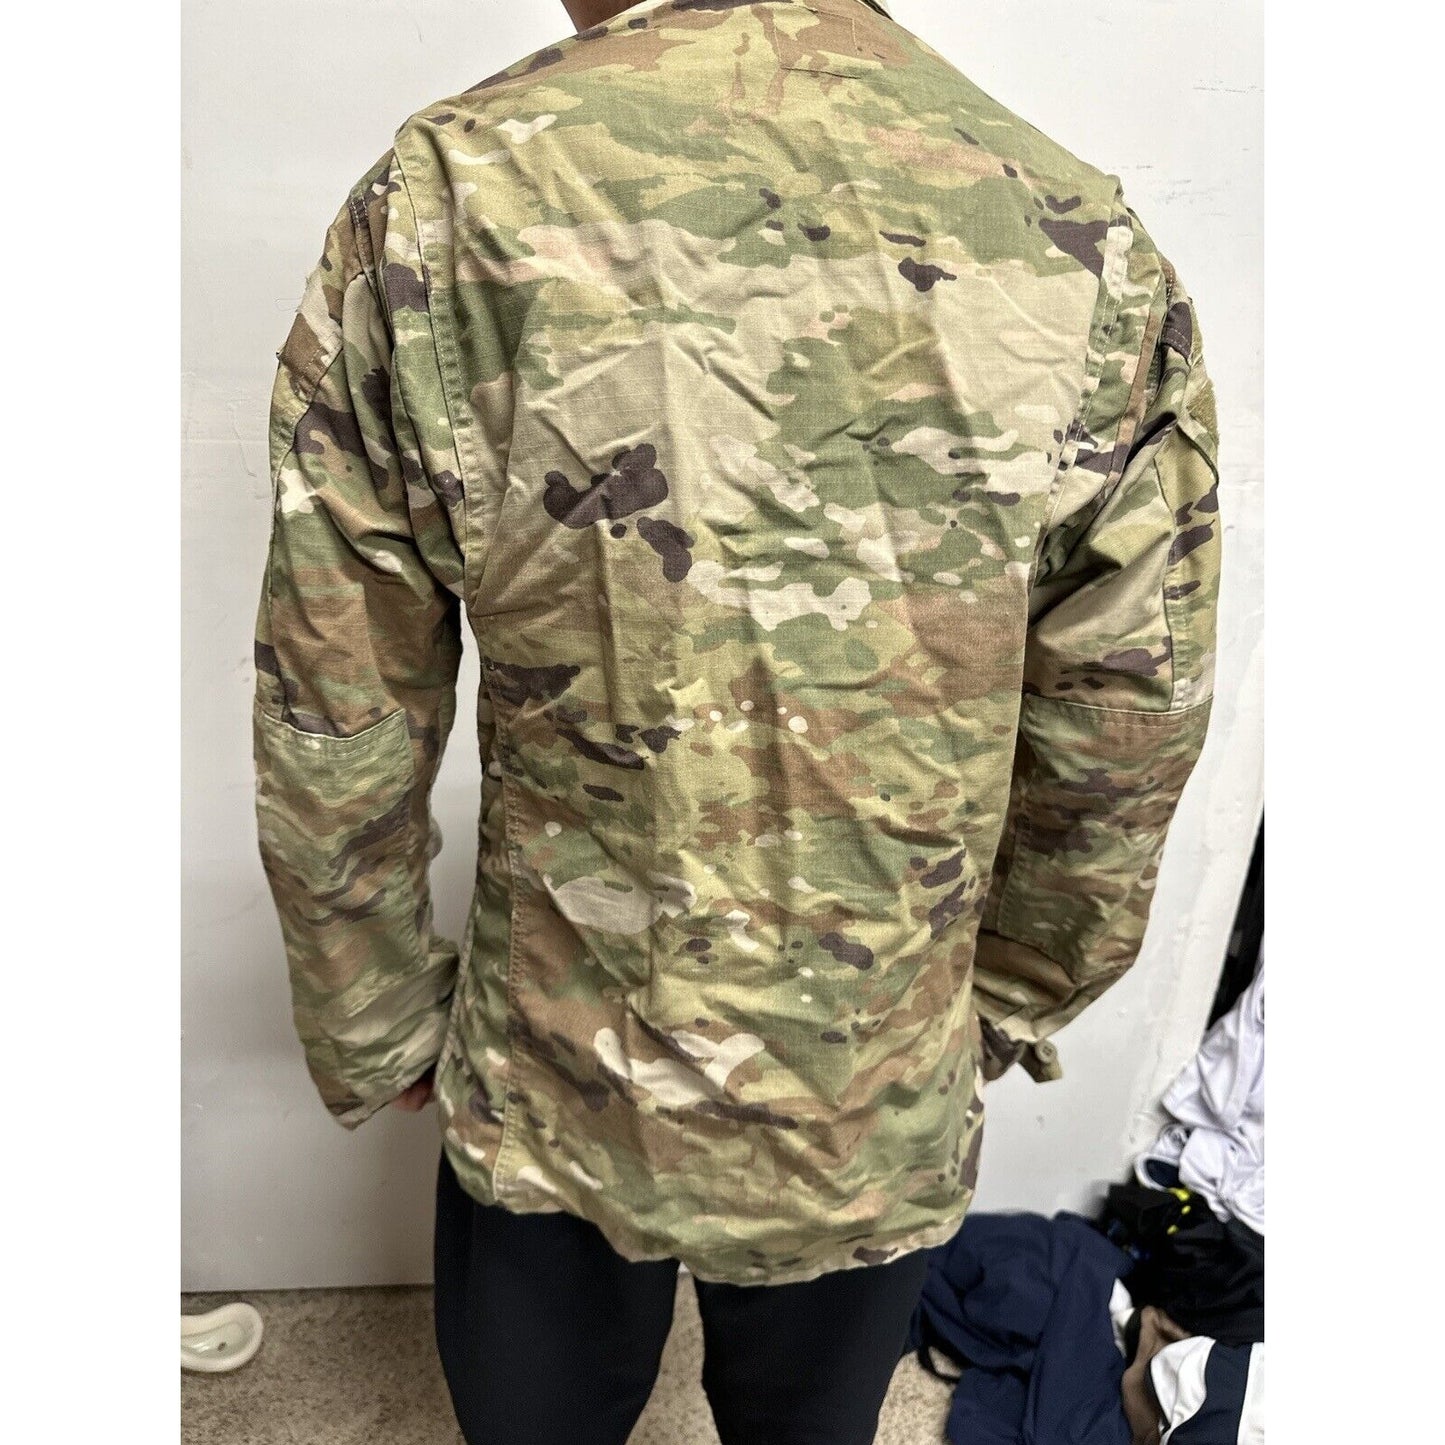 Men’s Ocp Small Regular Army Combat Air Force Space Force